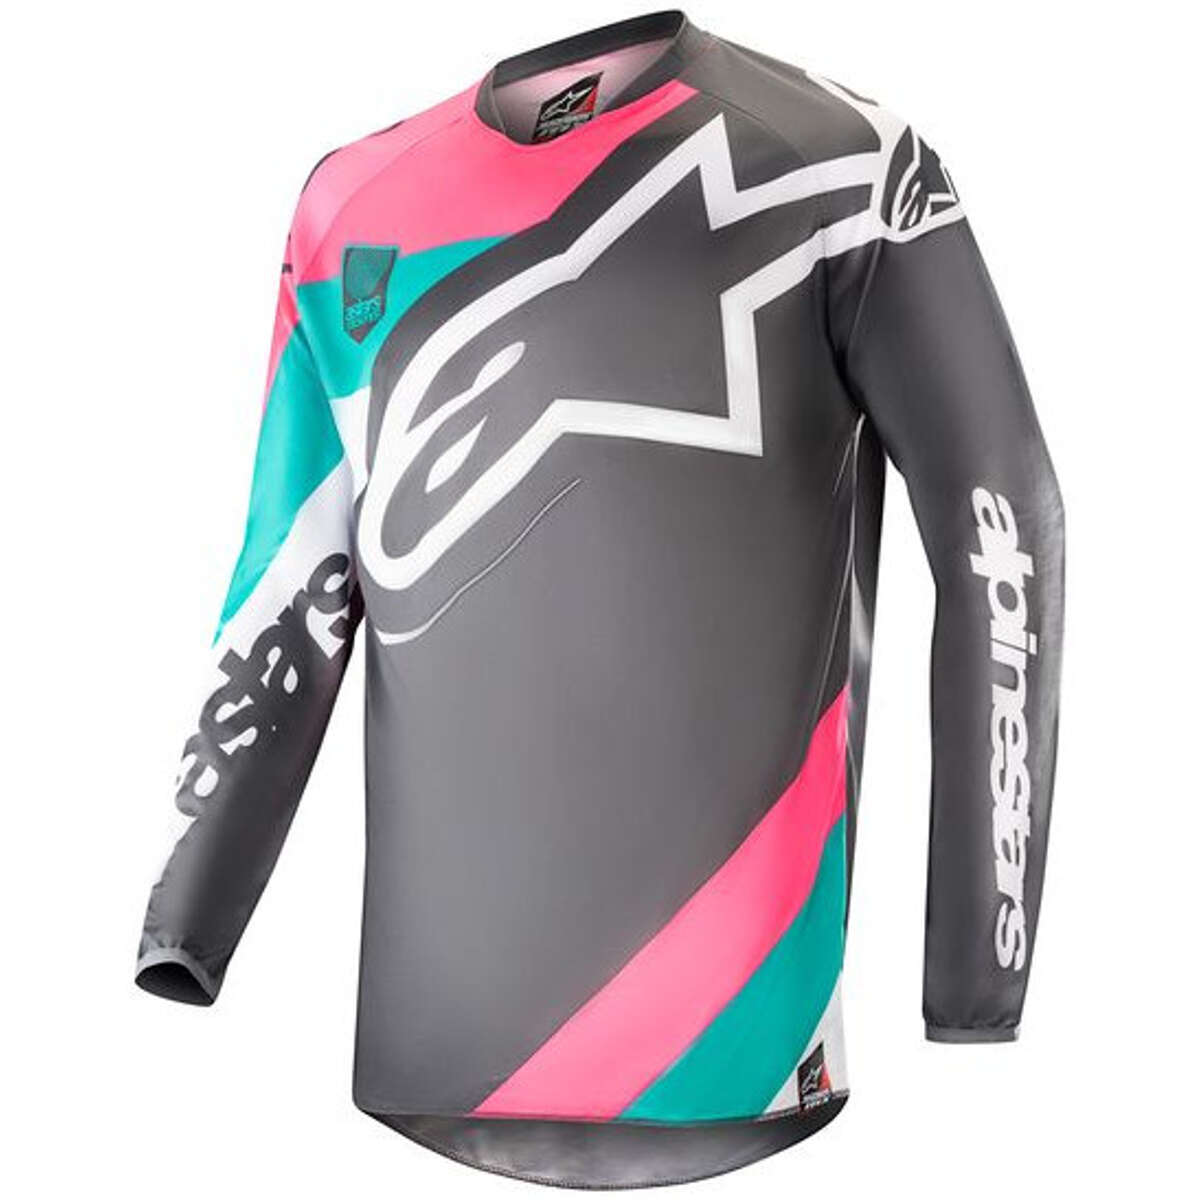 Alpinestars Maglia MX Racer Limited Edition Indy Vice - Grey/Pink/Turqouise